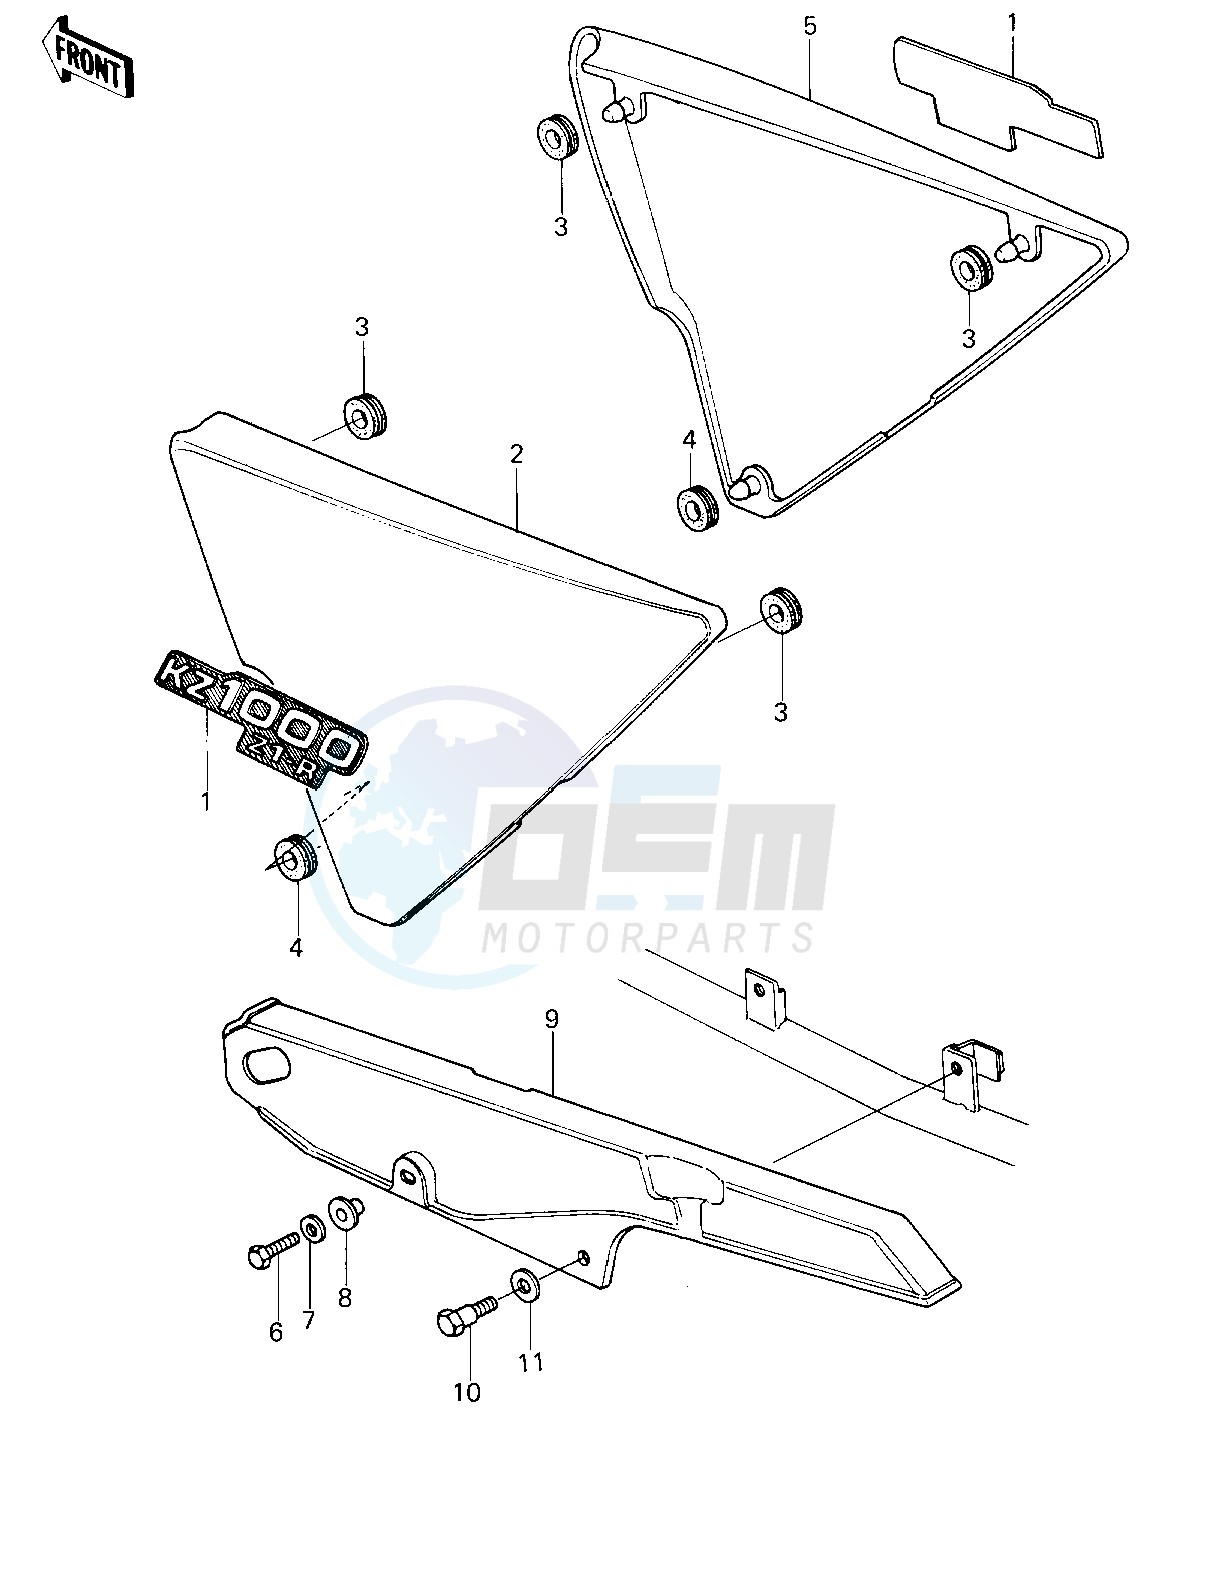 SIDE COVERS_CHAIN COVER -- 78 D1- - blueprint